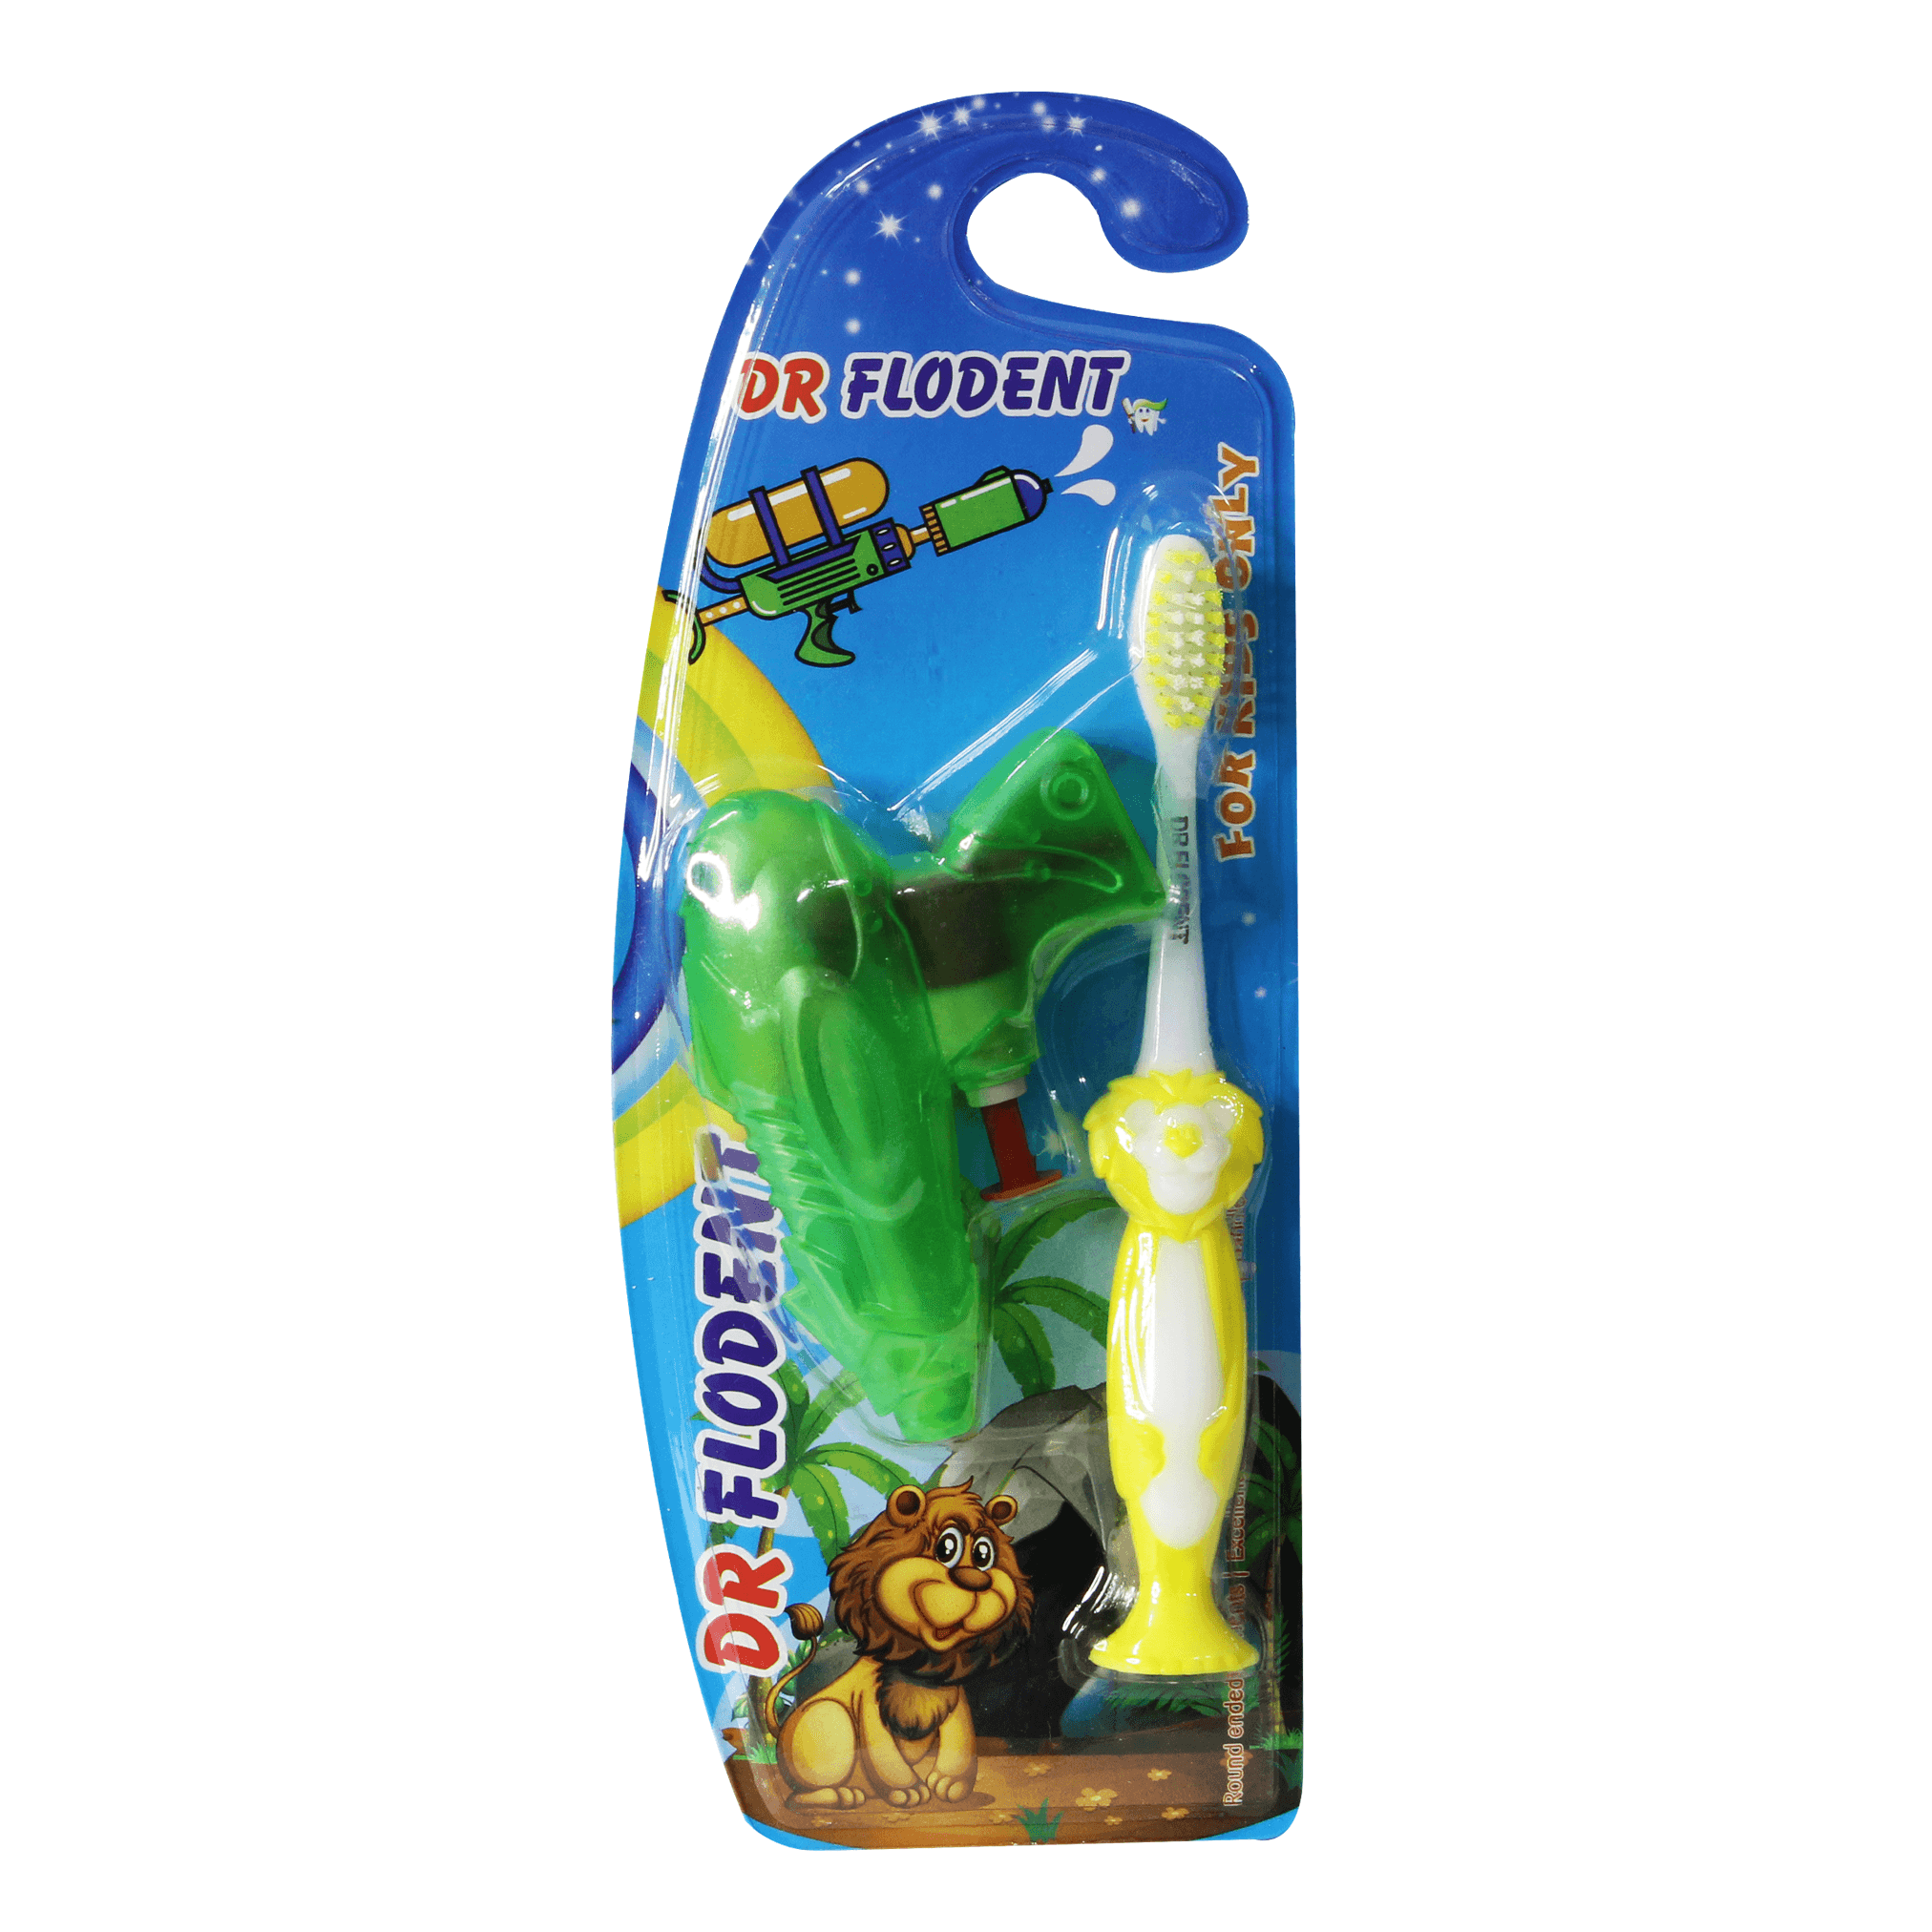 Dr Flodent Kids Toothbrush Extra Soft With Water Gun Toy - BumbleToys - 2-4 Years, 5-7 Years, Baby Saftey & Health, Boys, Toothbrush